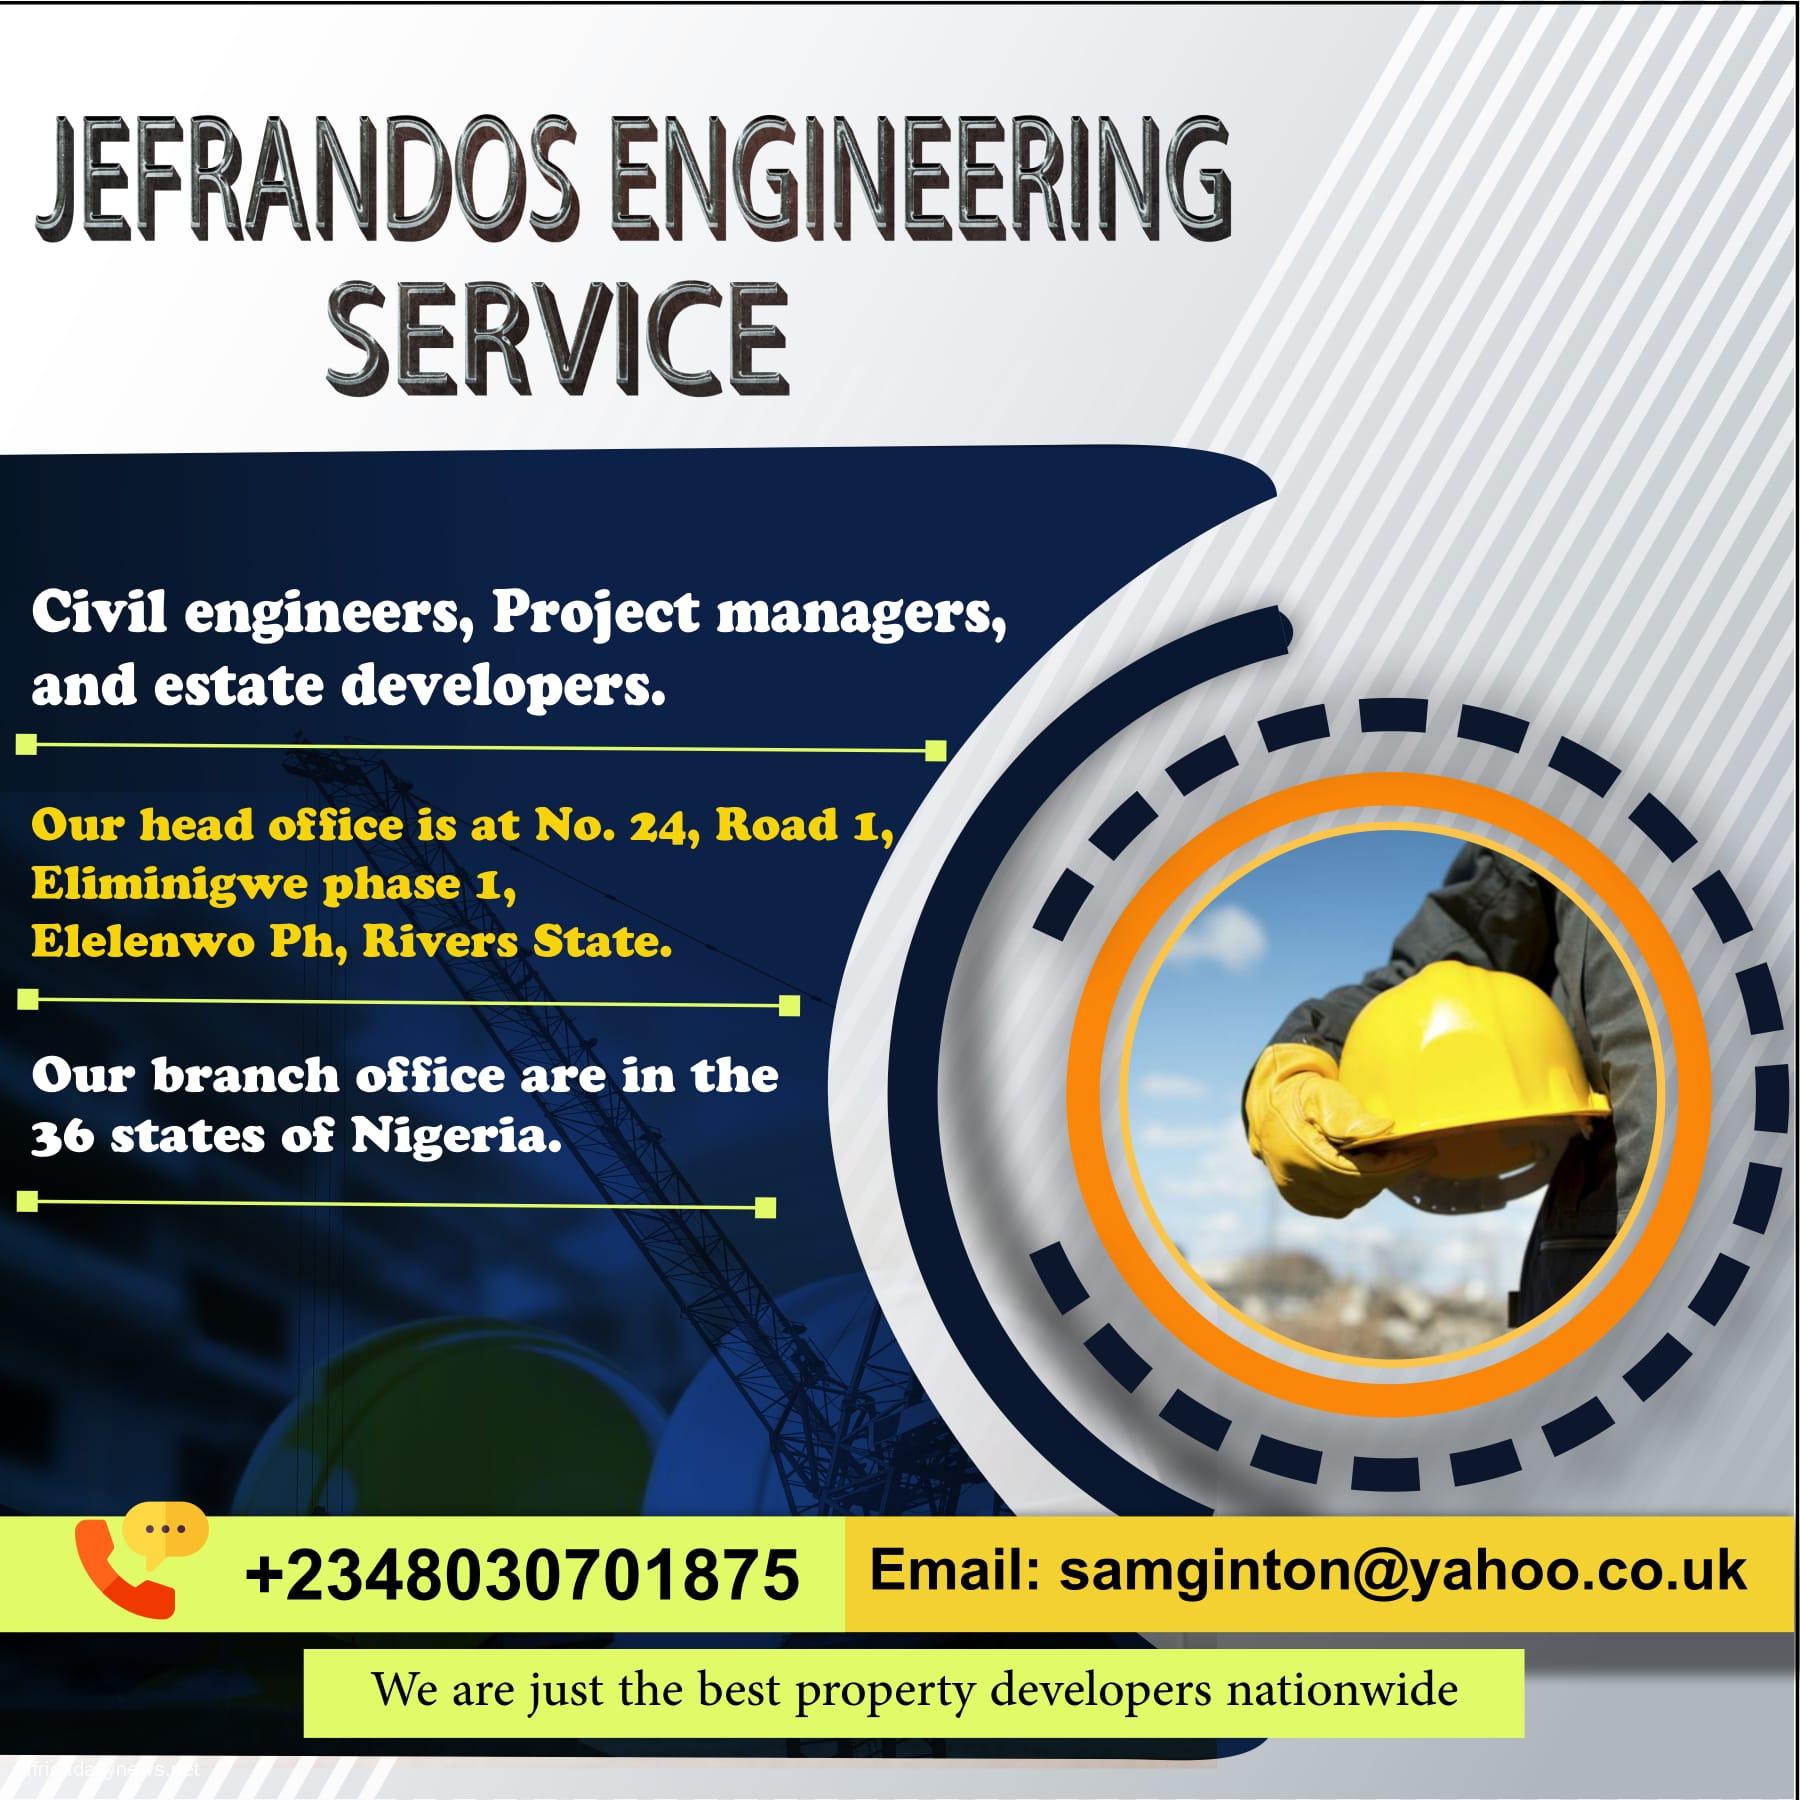 Jefrandos Engineering Solutions: Expertise Meets Excellence